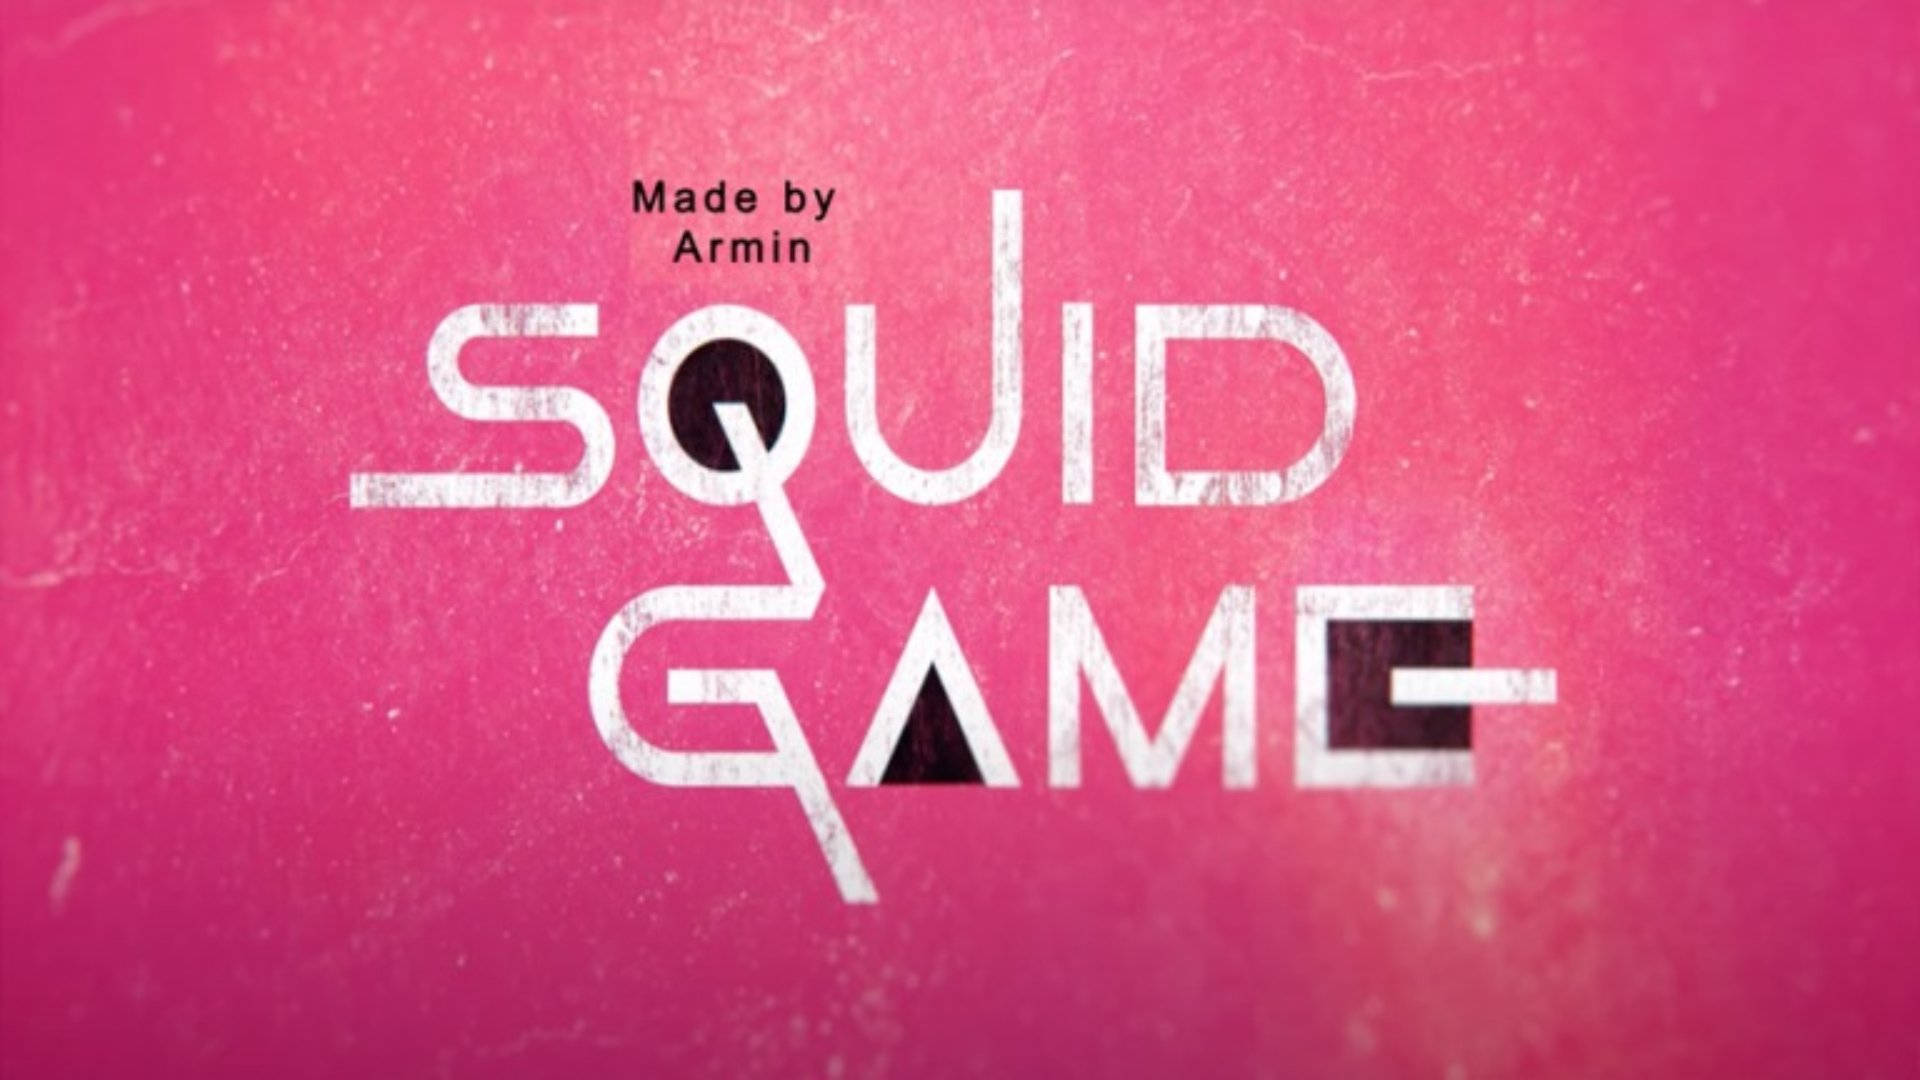 Hd Background Of Squid Game